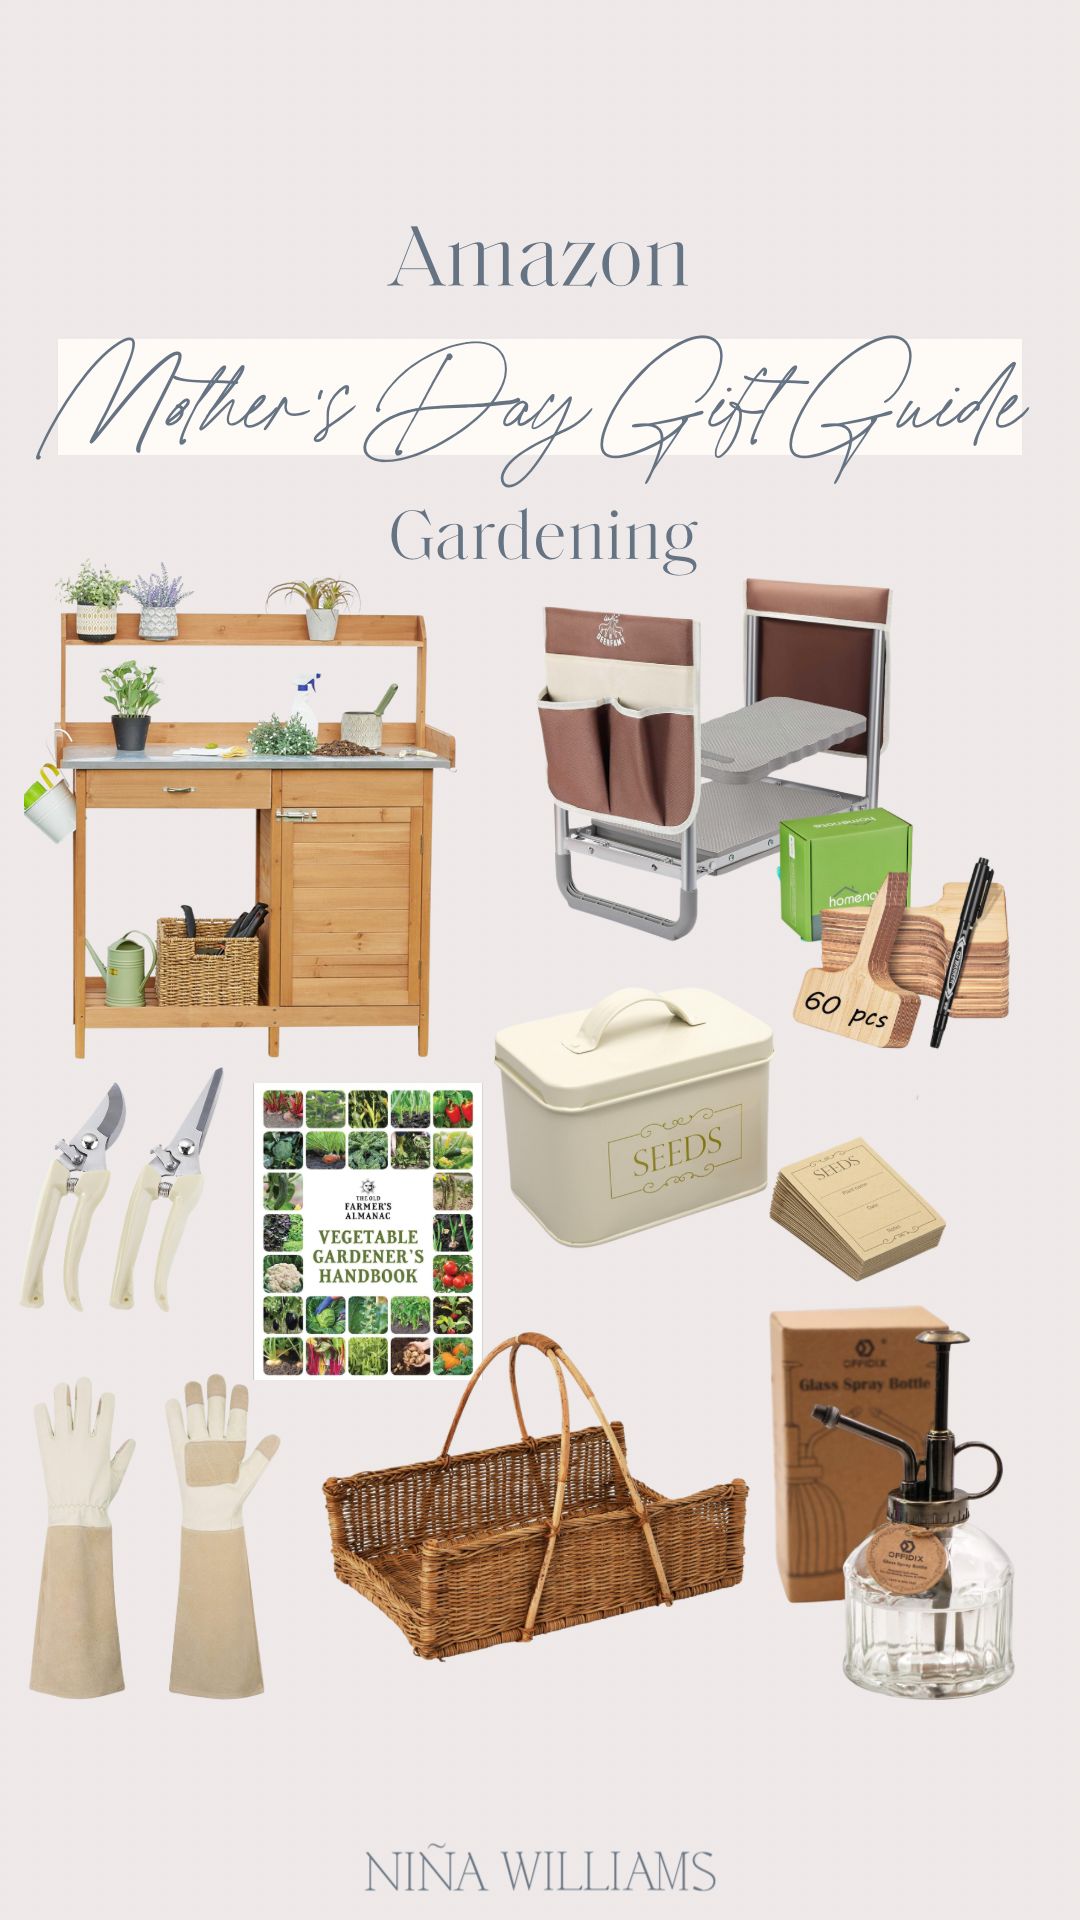 Mother’s Day Gift Guide Gardening Supplies!
Posted today
 | Amazon (US)